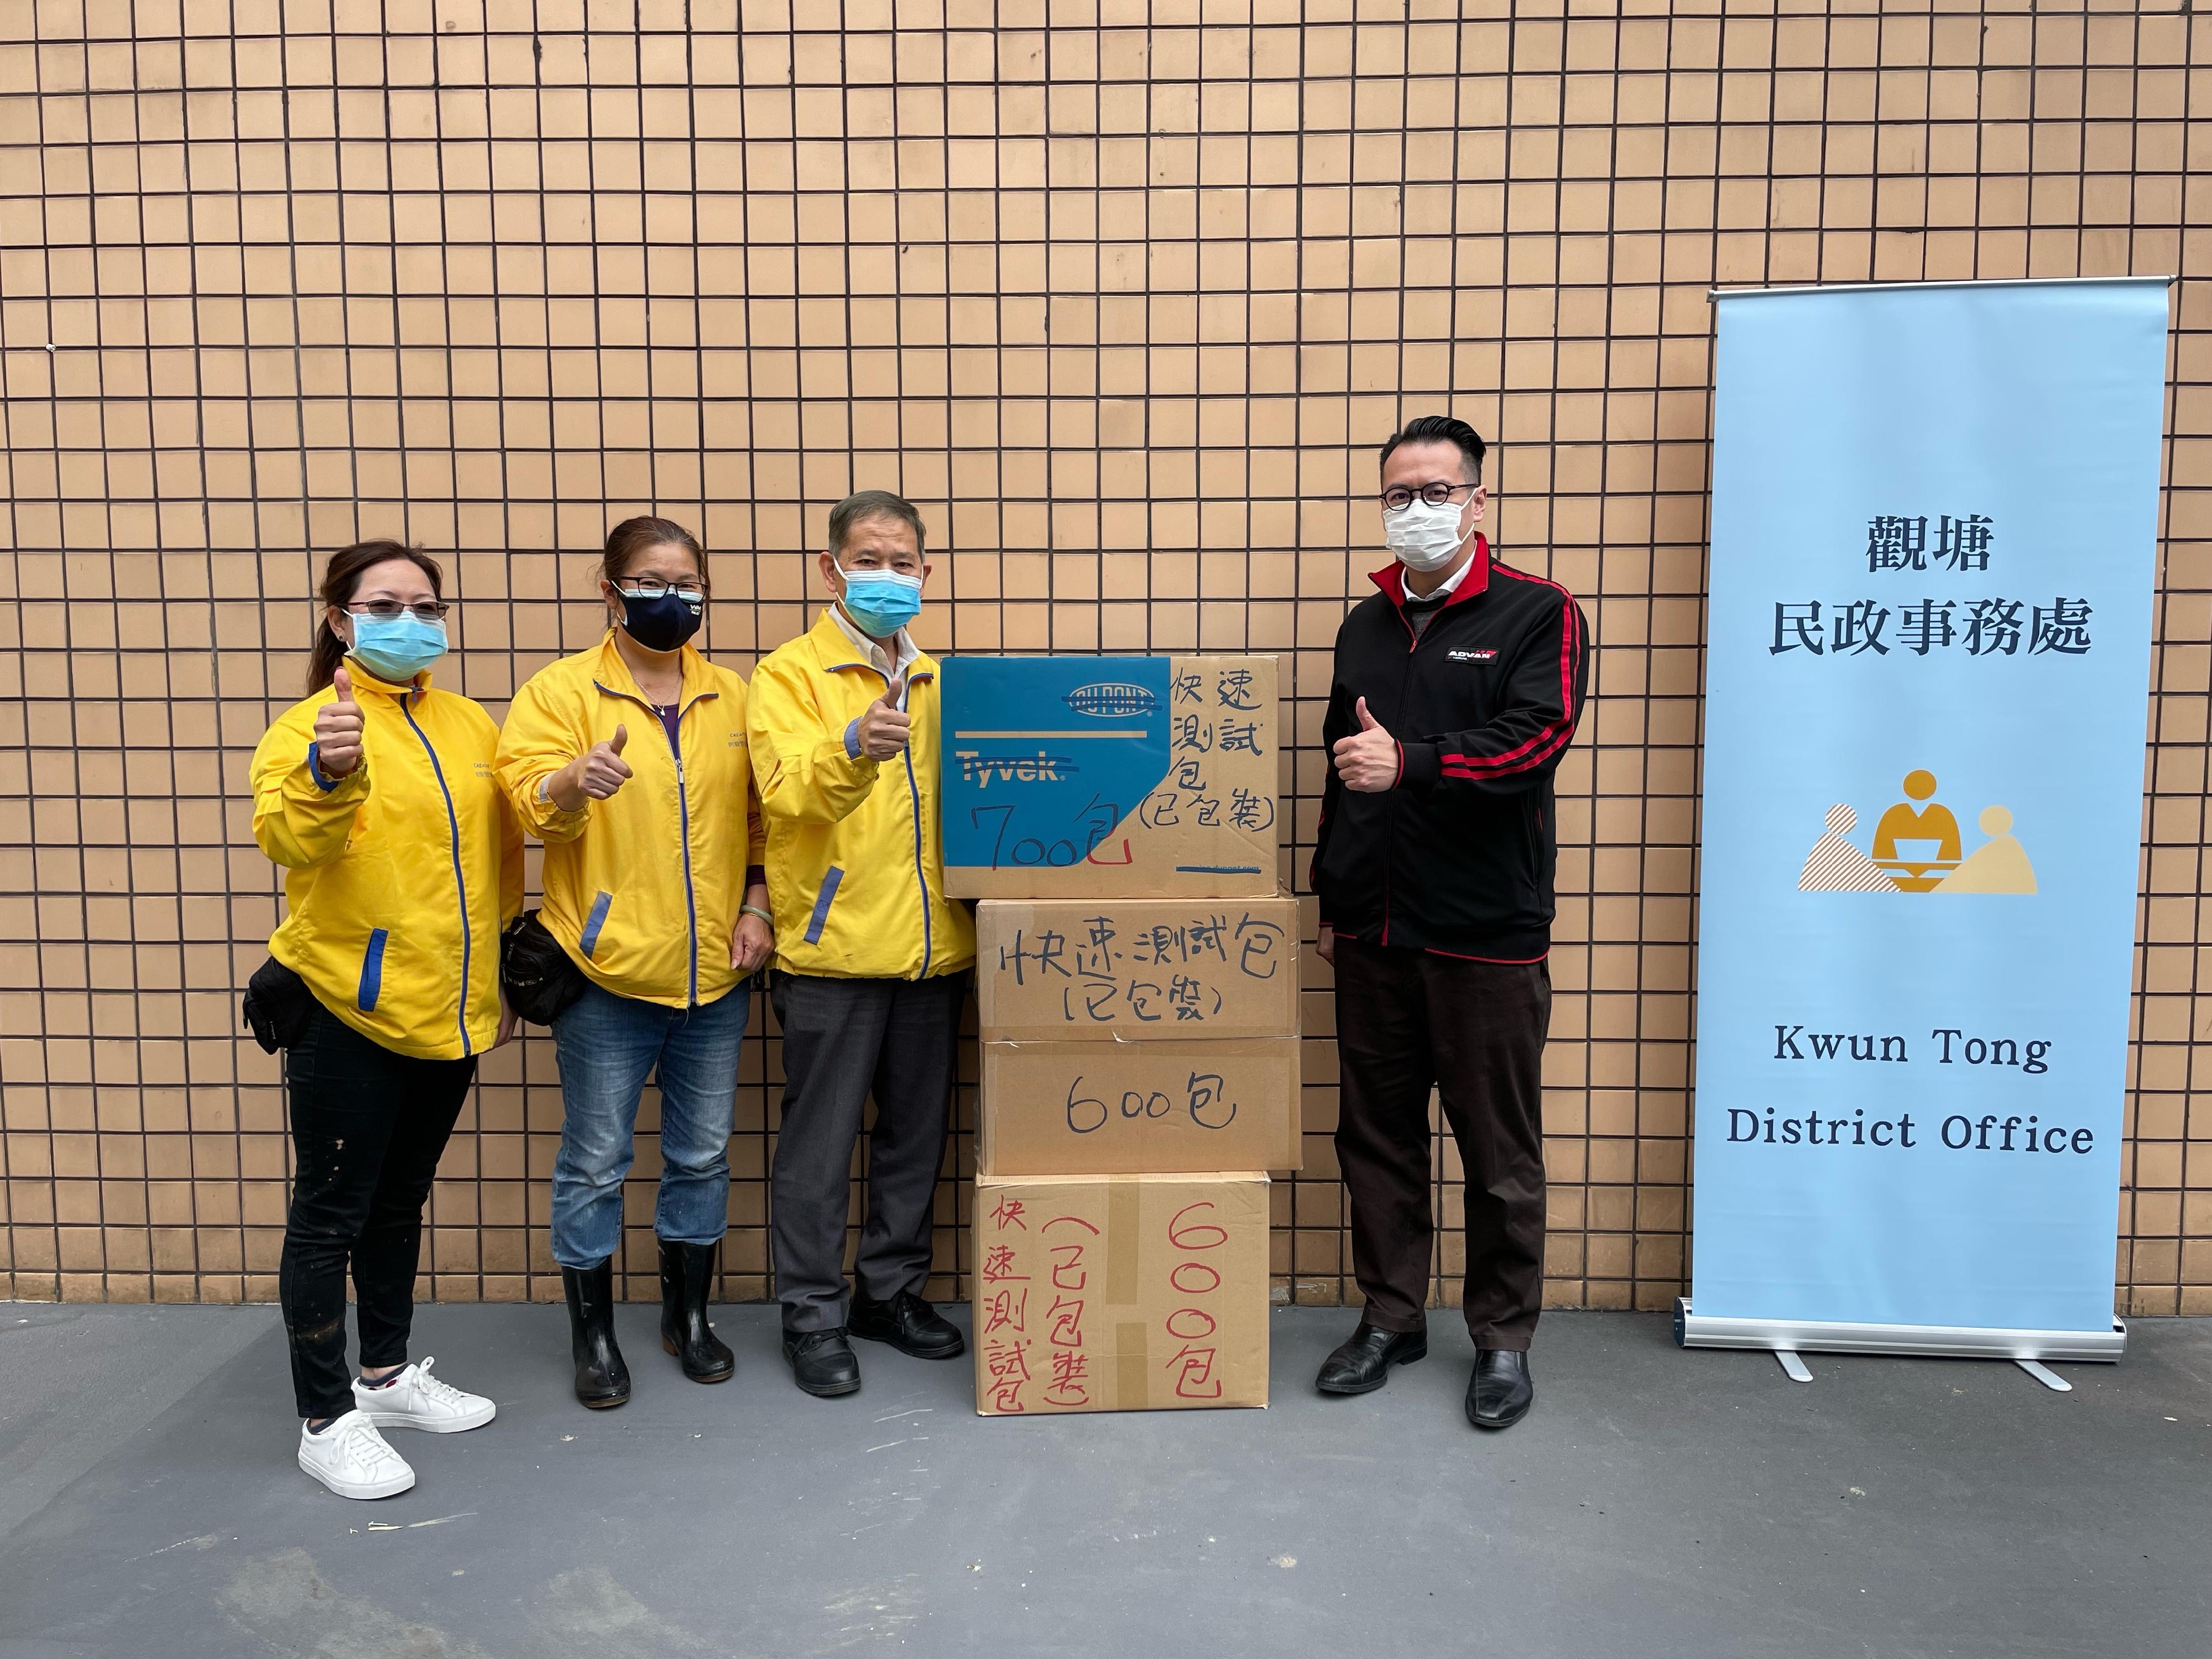 The Kwun Tong District Office today (February 16) distributed rapid test kits to households, cleansing workers and property management staff living and working in Sau Hong House and Sau Lok House for voluntary testing through the Sau Mau Ping Estate property management company and the Housing Department.